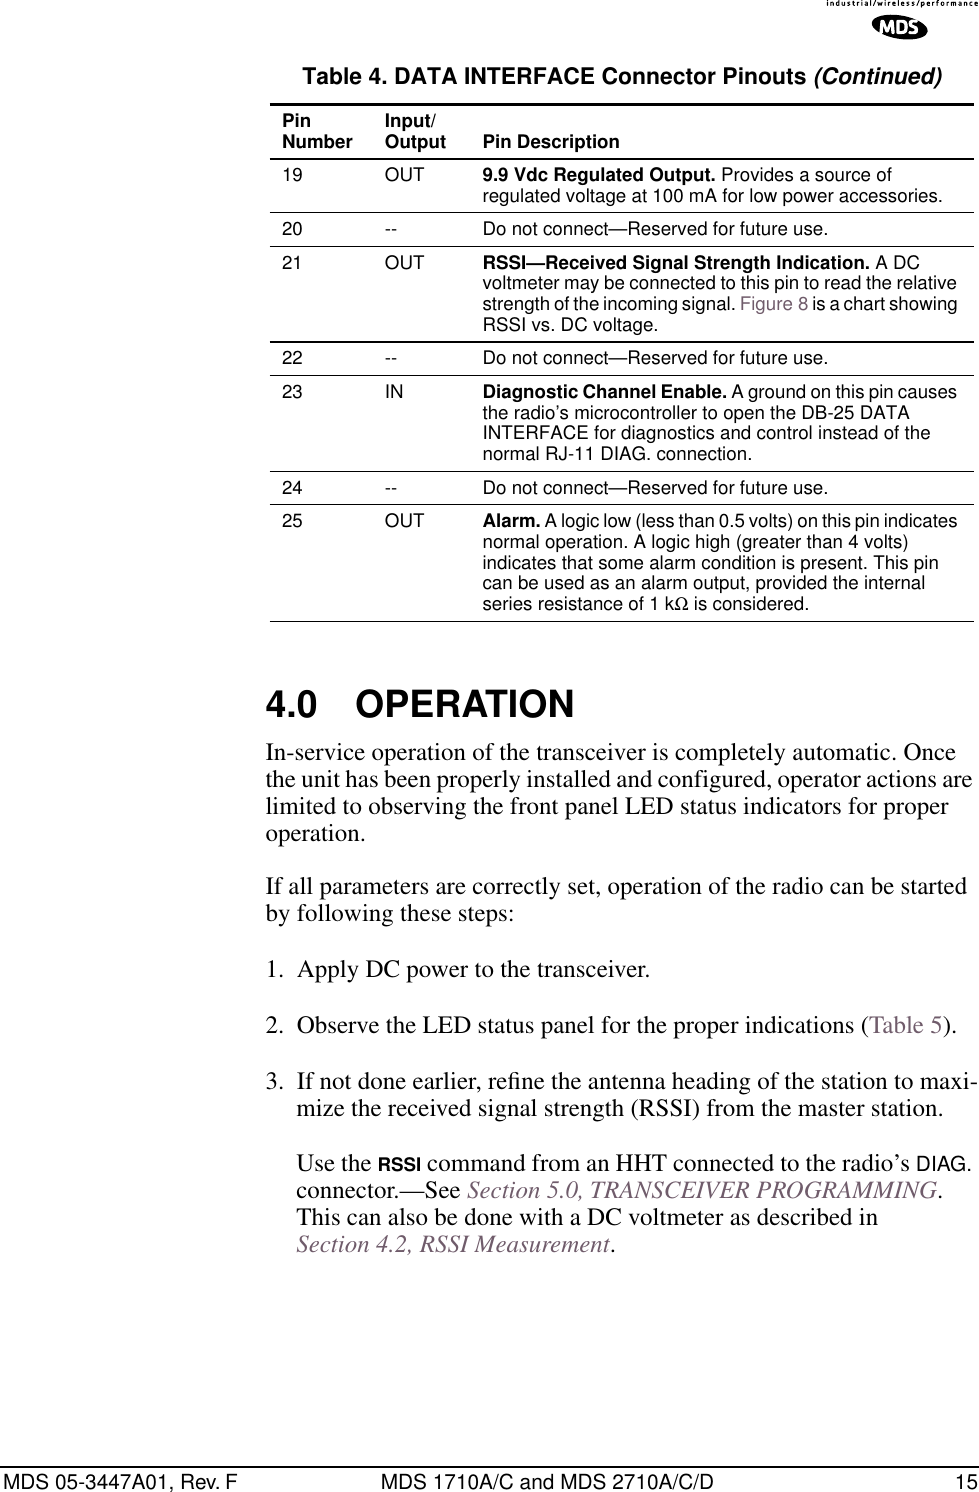 MDS 05-3447A01, Rev. F MDS 1710A/C and MDS 2710A/C/D 15Invisible place holder4.0 OPERATIONIn-service operation of the transceiver is completely automatic. Once the unit has been properly installed and configured, operator actions are limited to observing the front panel LED status indicators for proper operation.If all parameters are correctly set, operation of the radio can be started by following these steps:1. Apply DC power to the transceiver.2. Observe the LED status panel for the proper indications (Table 5).3. If not done earlier, reﬁne the antenna heading of the station to maxi-mize the received signal strength (RSSI) from the master station.Use the RSSI command from an HHT connected to the radio’s DIAG. connector.—See Section 5.0, TRANSCEIVER PROGRAMMING. This can also be done with a DC voltmeter as described in Section 4.2, RSSI Measurement.19 OUT 9.9 Vdc Regulated Output. Provides a source of regulated voltage at 100 mA for low power accessories.20 -- Do not connect—Reserved for future use.21 OUT RSSI—Received Signal Strength Indication. A DC voltmeter may be connected to this pin to read the relative strength of the incoming signal. Figure 8 is a chart showing RSSI vs. DC voltage.22 -- Do not connect—Reserved for future use.23 IN Diagnostic Channel Enable. A ground on this pin causes the radio’s microcontroller to open the DB-25 DATA INTERFACE for diagnostics and control instead of the normal RJ-11 DIAG. connection.24 -- Do not connect—Reserved for future use.25 OUT Alarm. A logic low (less than 0.5 volts) on this pin indicates normal operation. A logic high (greater than 4 volts) indicates that some alarm condition is present. This pin can be used as an alarm output, provided the internal series resistance of 1 kΩ is considered.Table 4. DATA INTERFACE Connector Pinouts (Continued)PinNumber Input/Output Pin Description